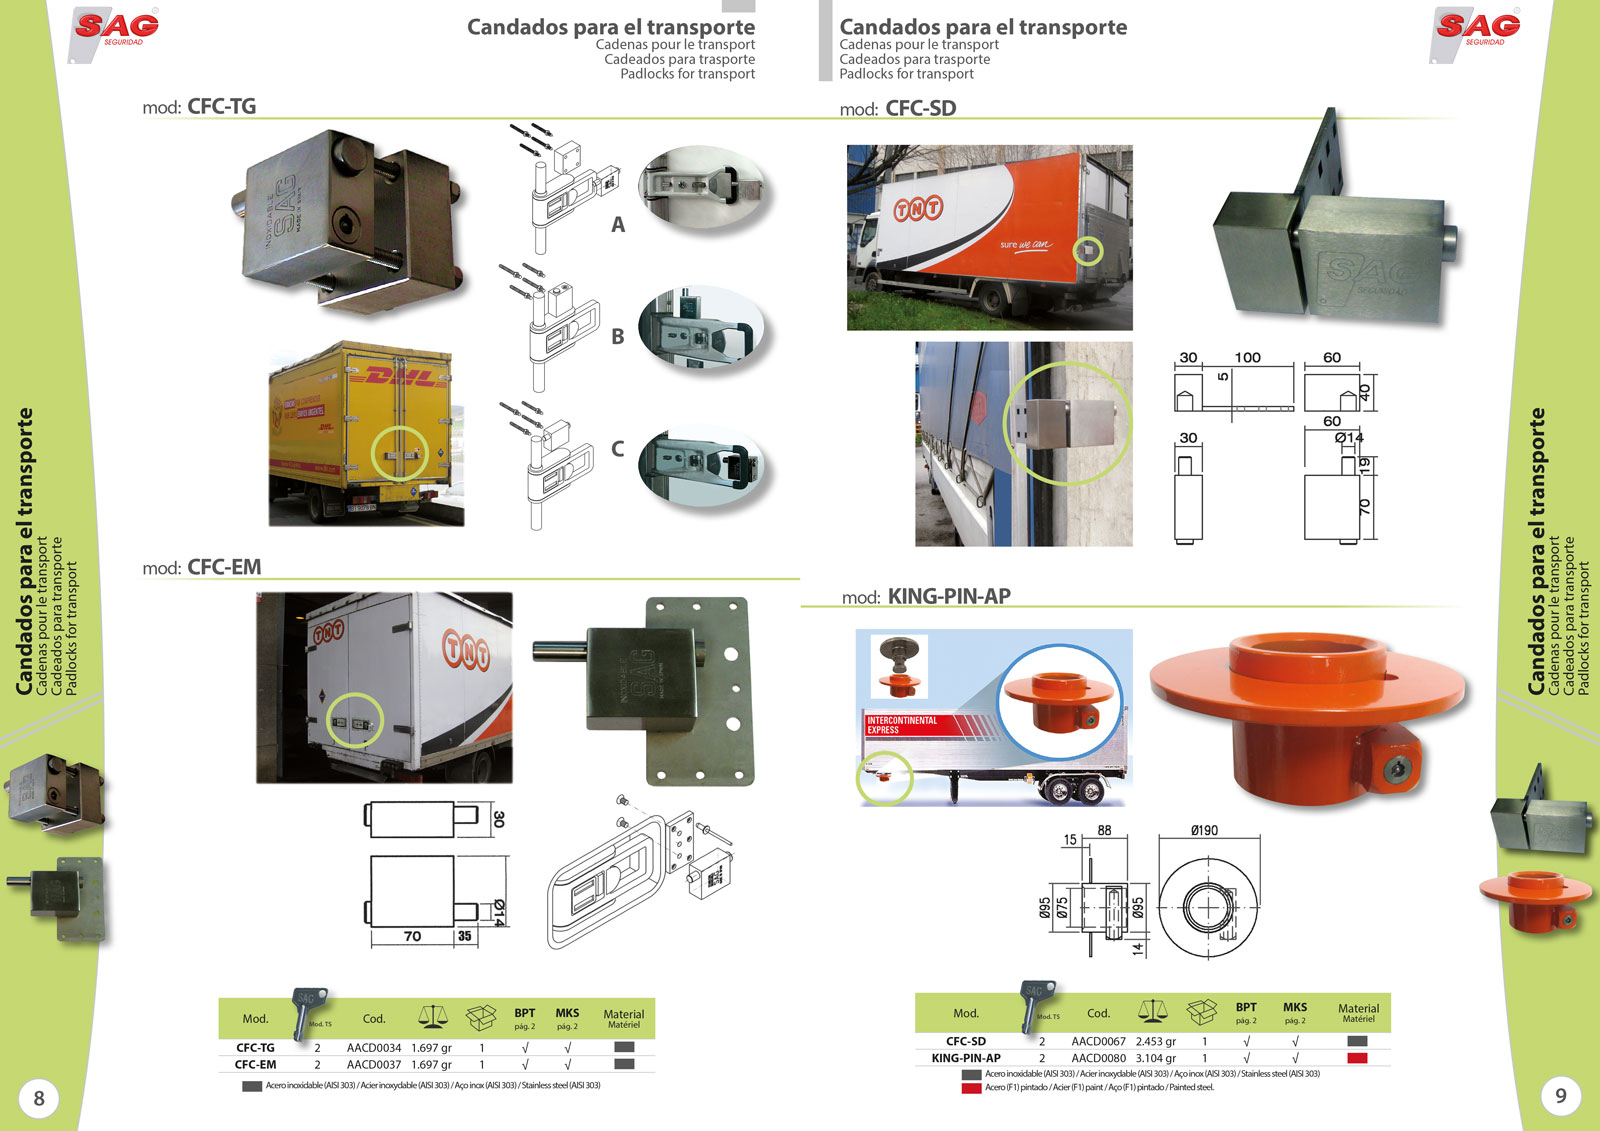 Layout and creative design of corporate catalog of industrial products and services for security company: SAG Seguridad